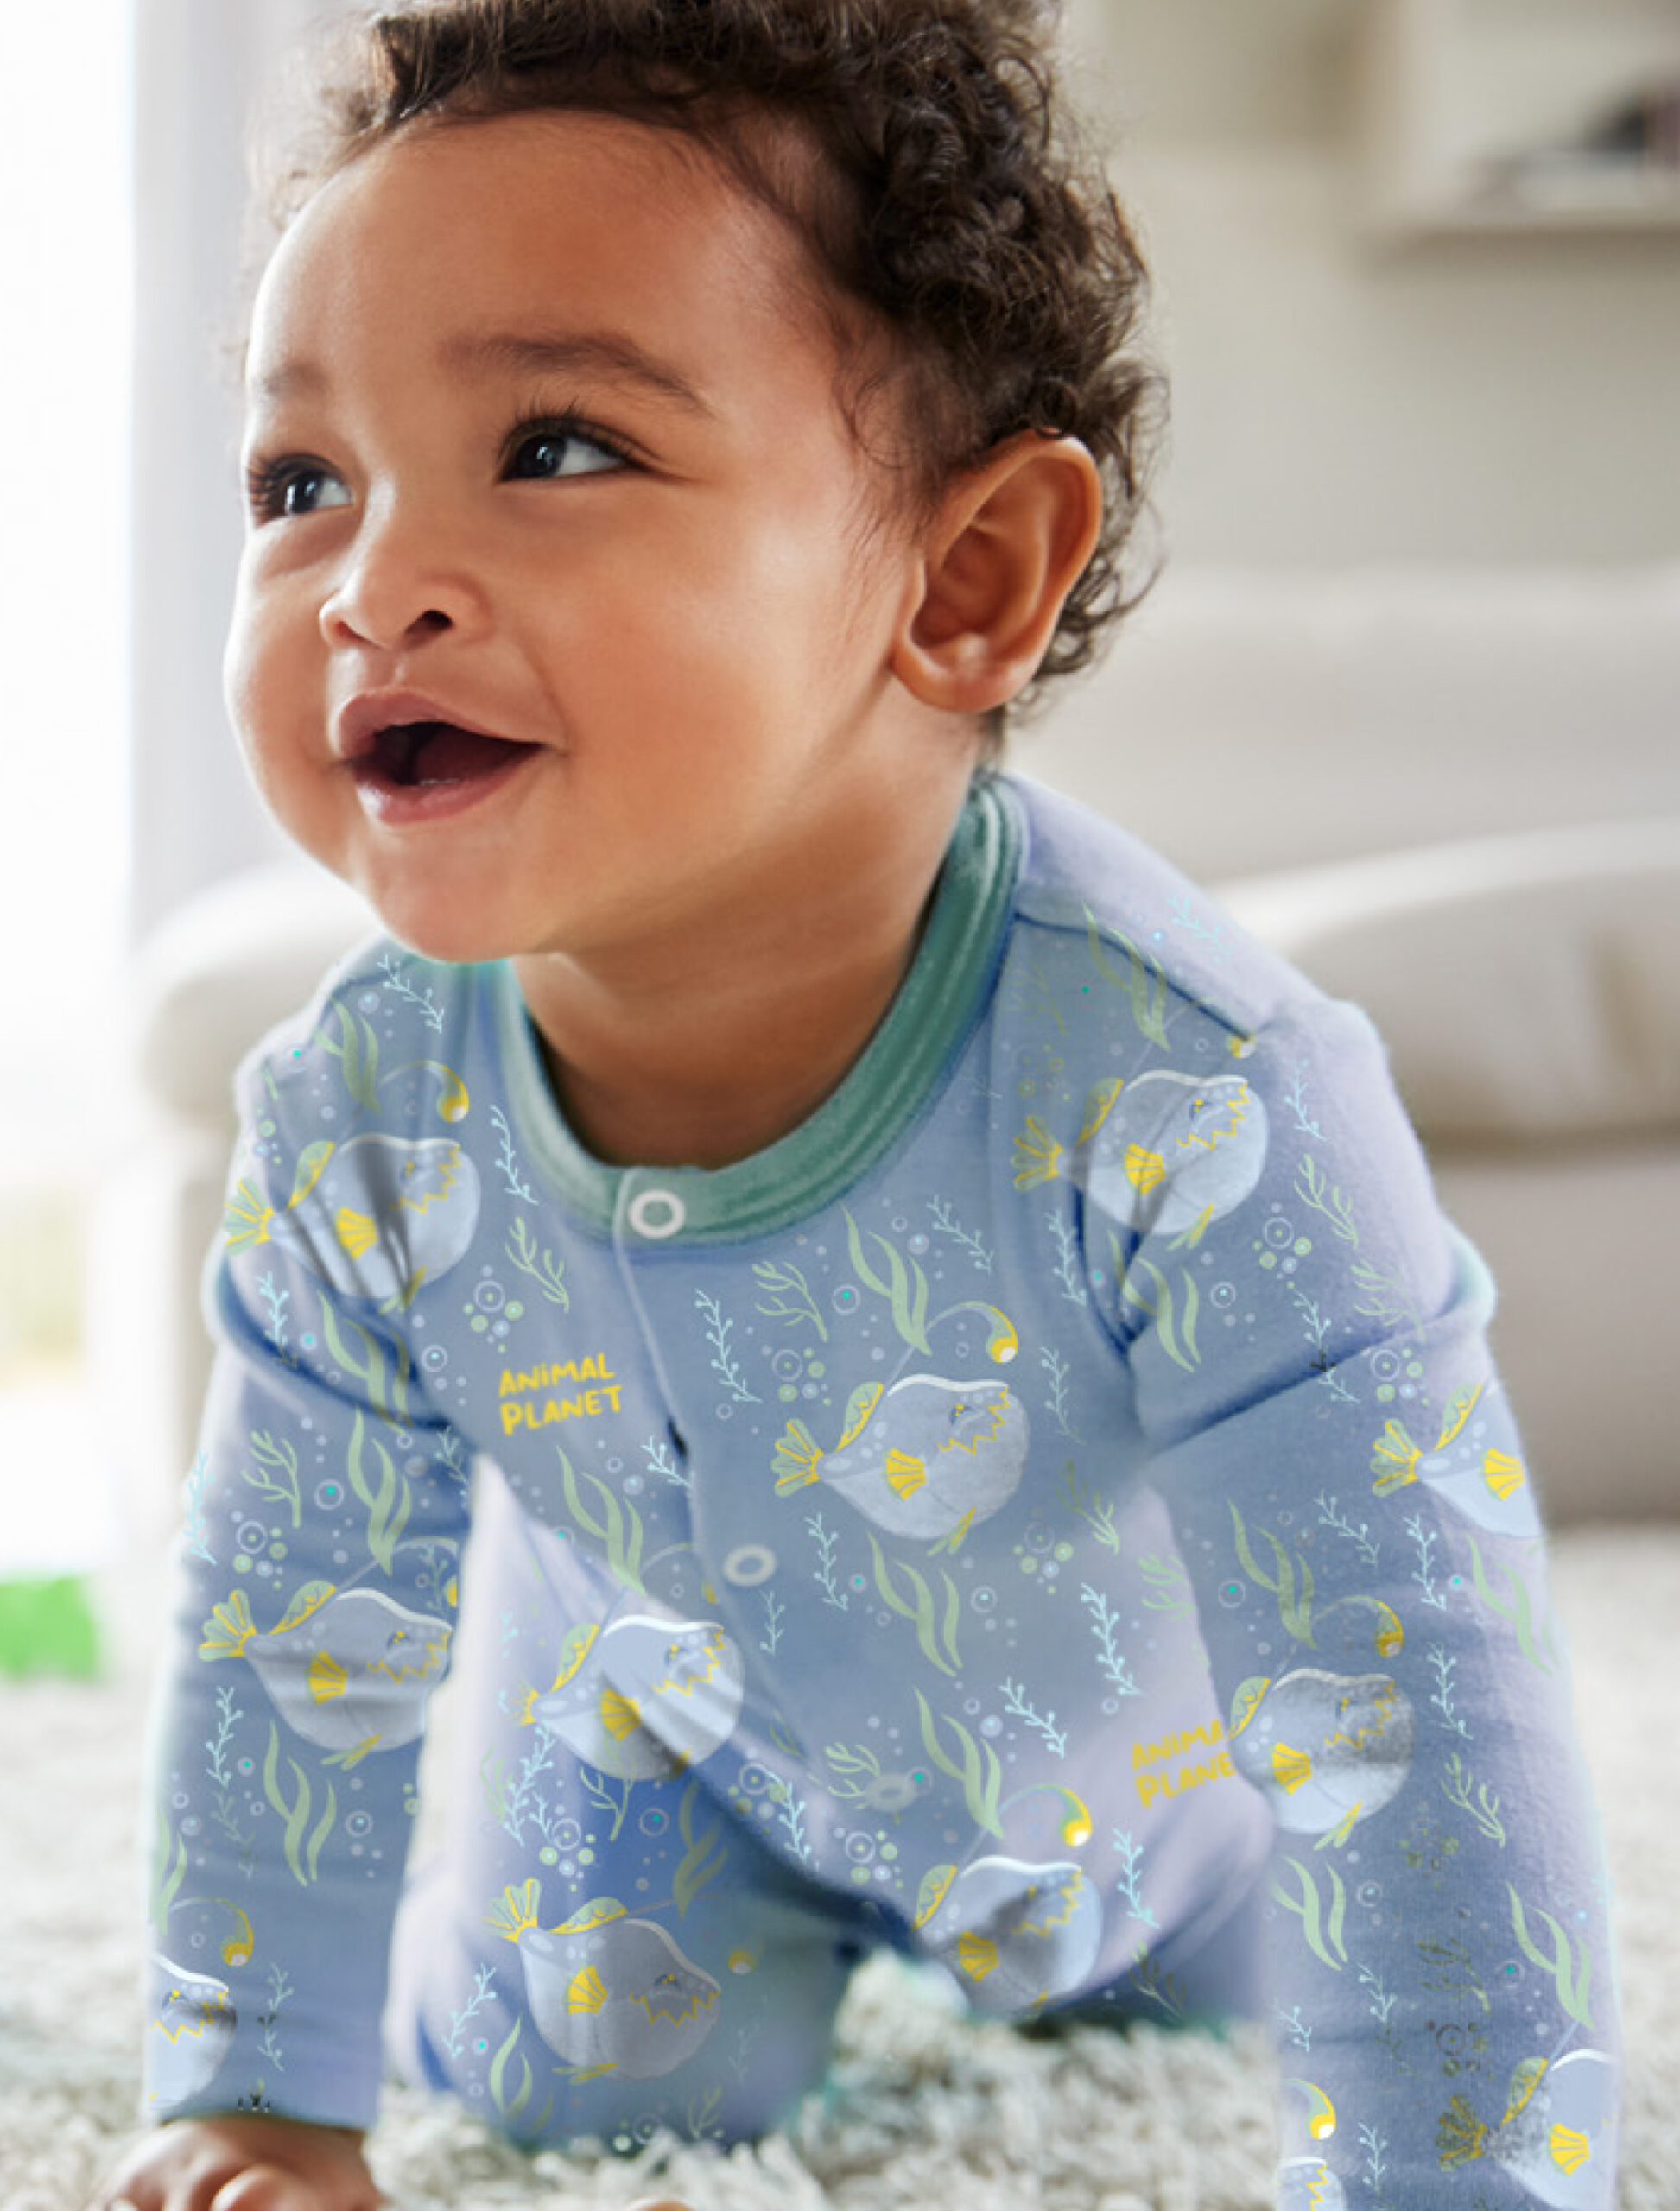 Smiling infant wearing pajamas featuring Under the Sea pattern.